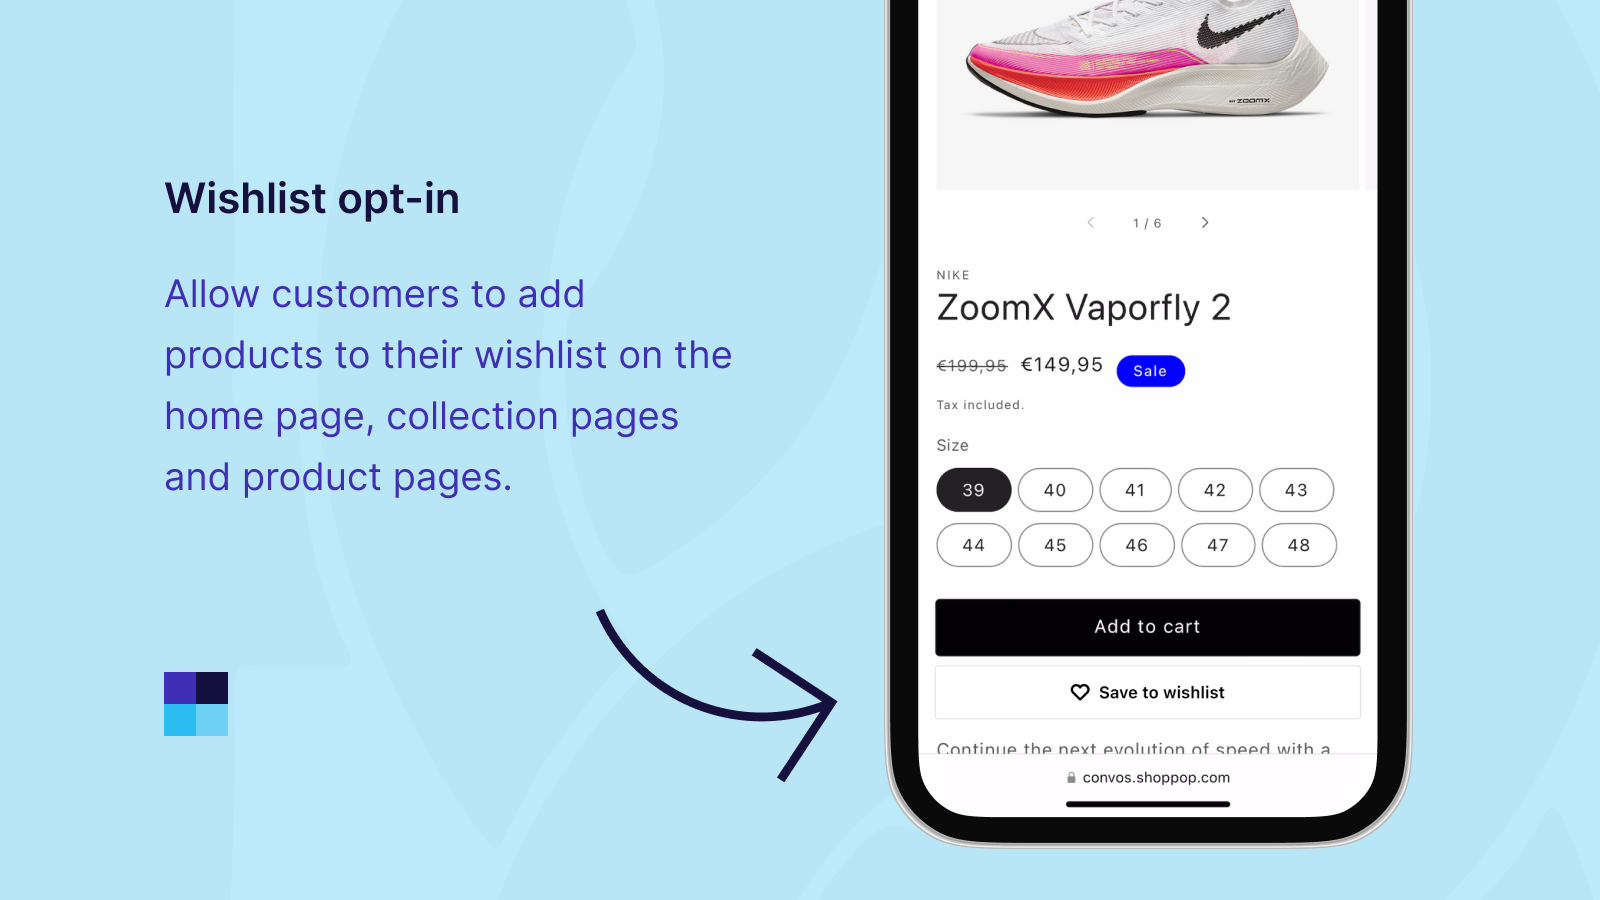 Customers can save products to their wishlist from any page